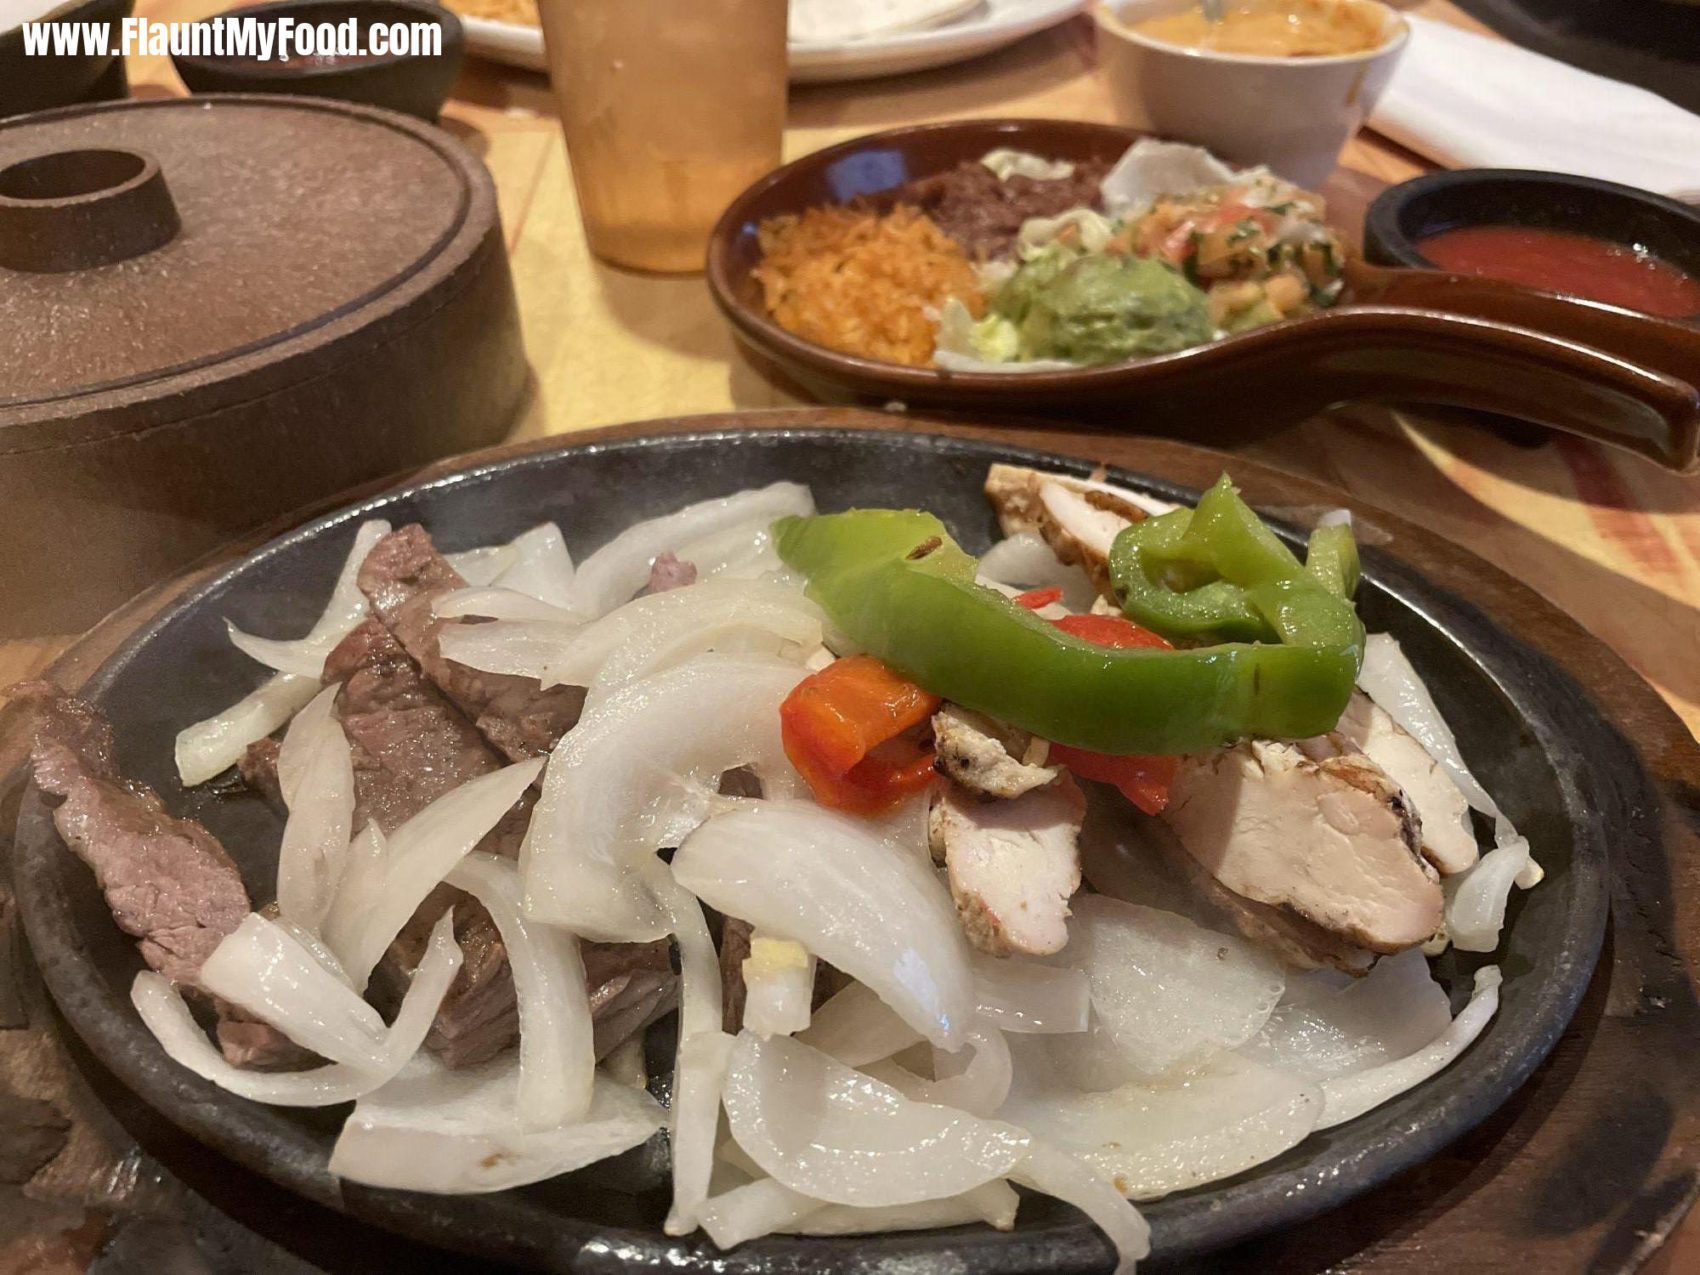 Chicken and beef fajitas at Esparza GrapevineChicken and beef fajitas at Esparza located in downtown Grapevine in North Fort Worth.